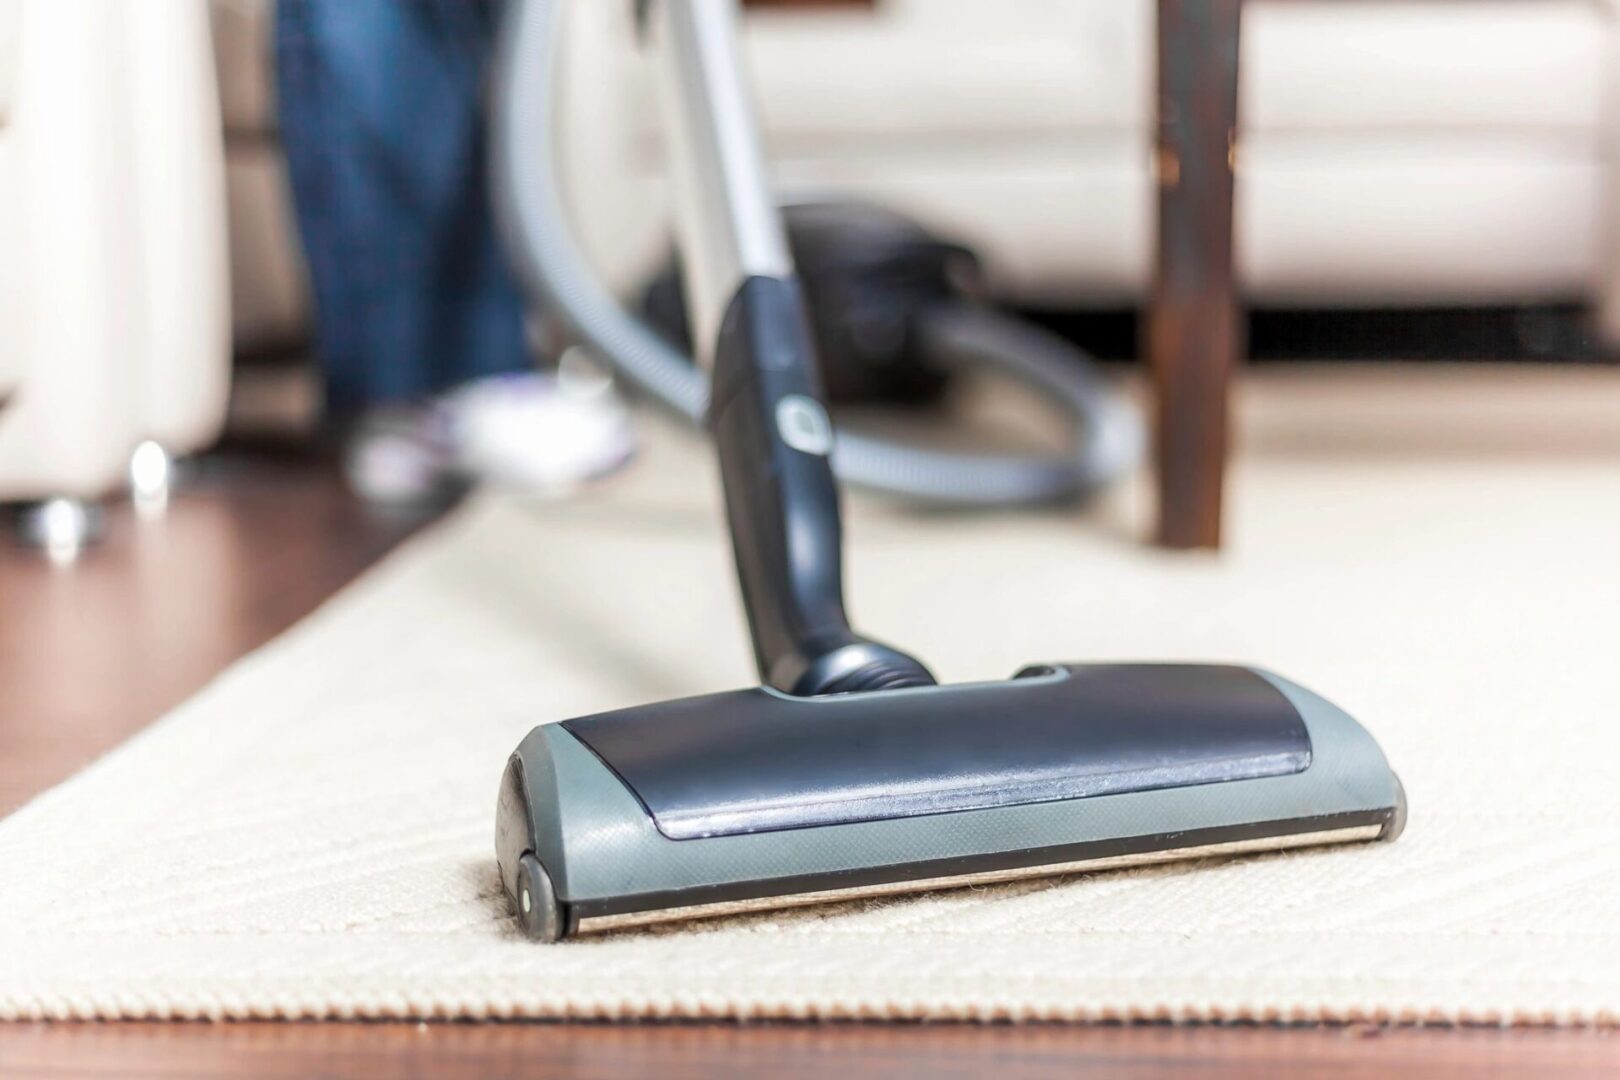 A vacuum cleaner is on the floor of a room.